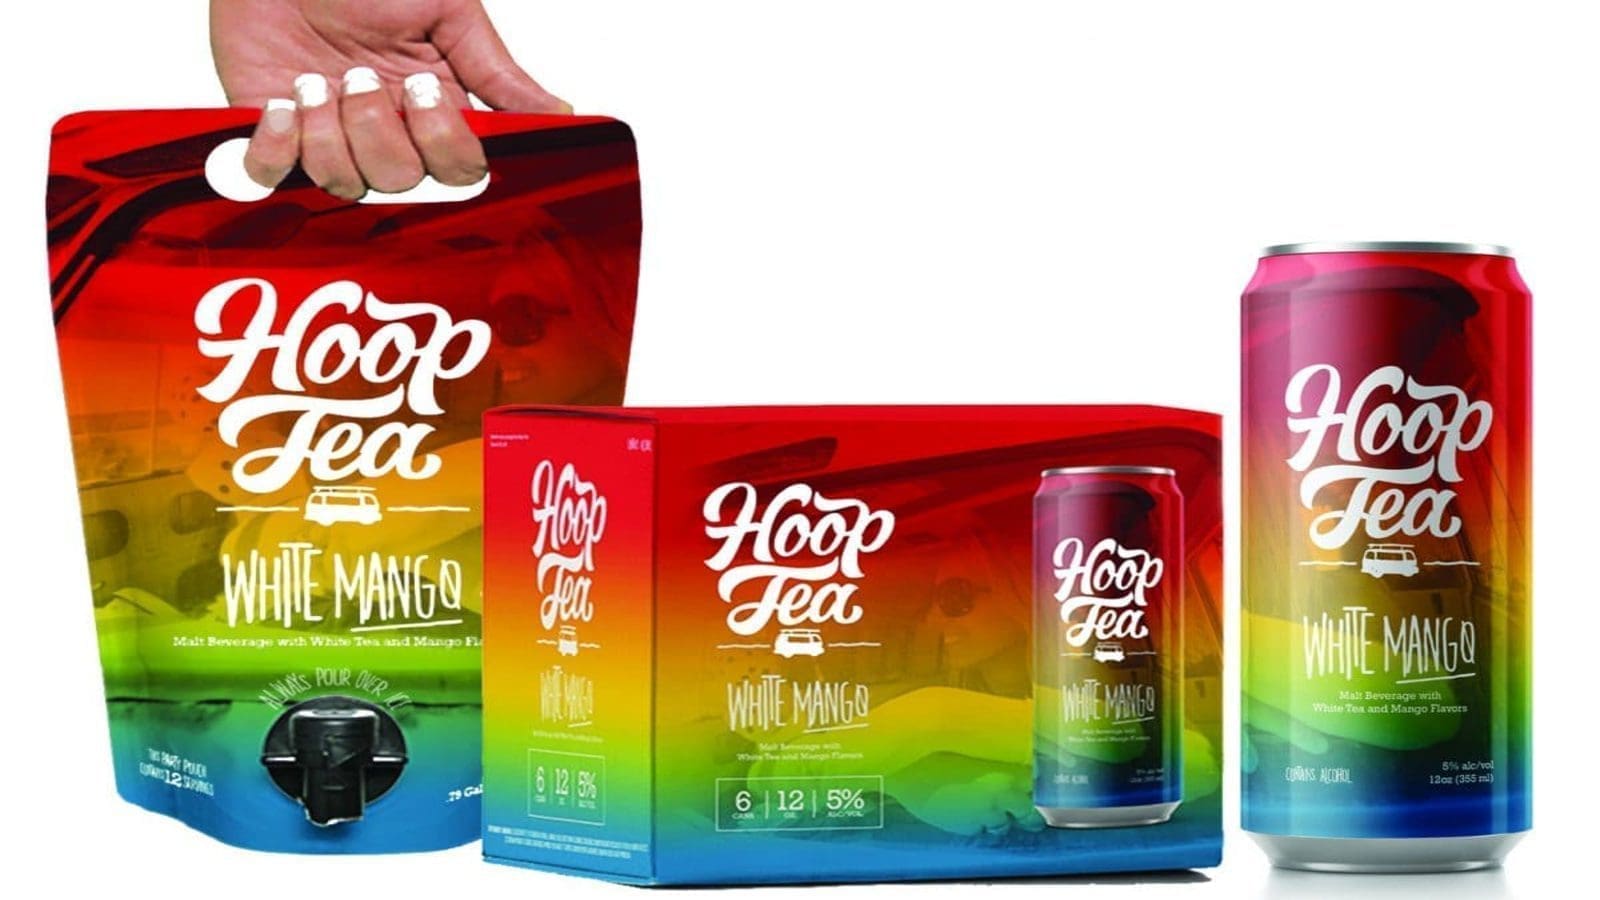 Anheuser-Busch expands beyond beer portfolio with acquisition of Hoop Tea